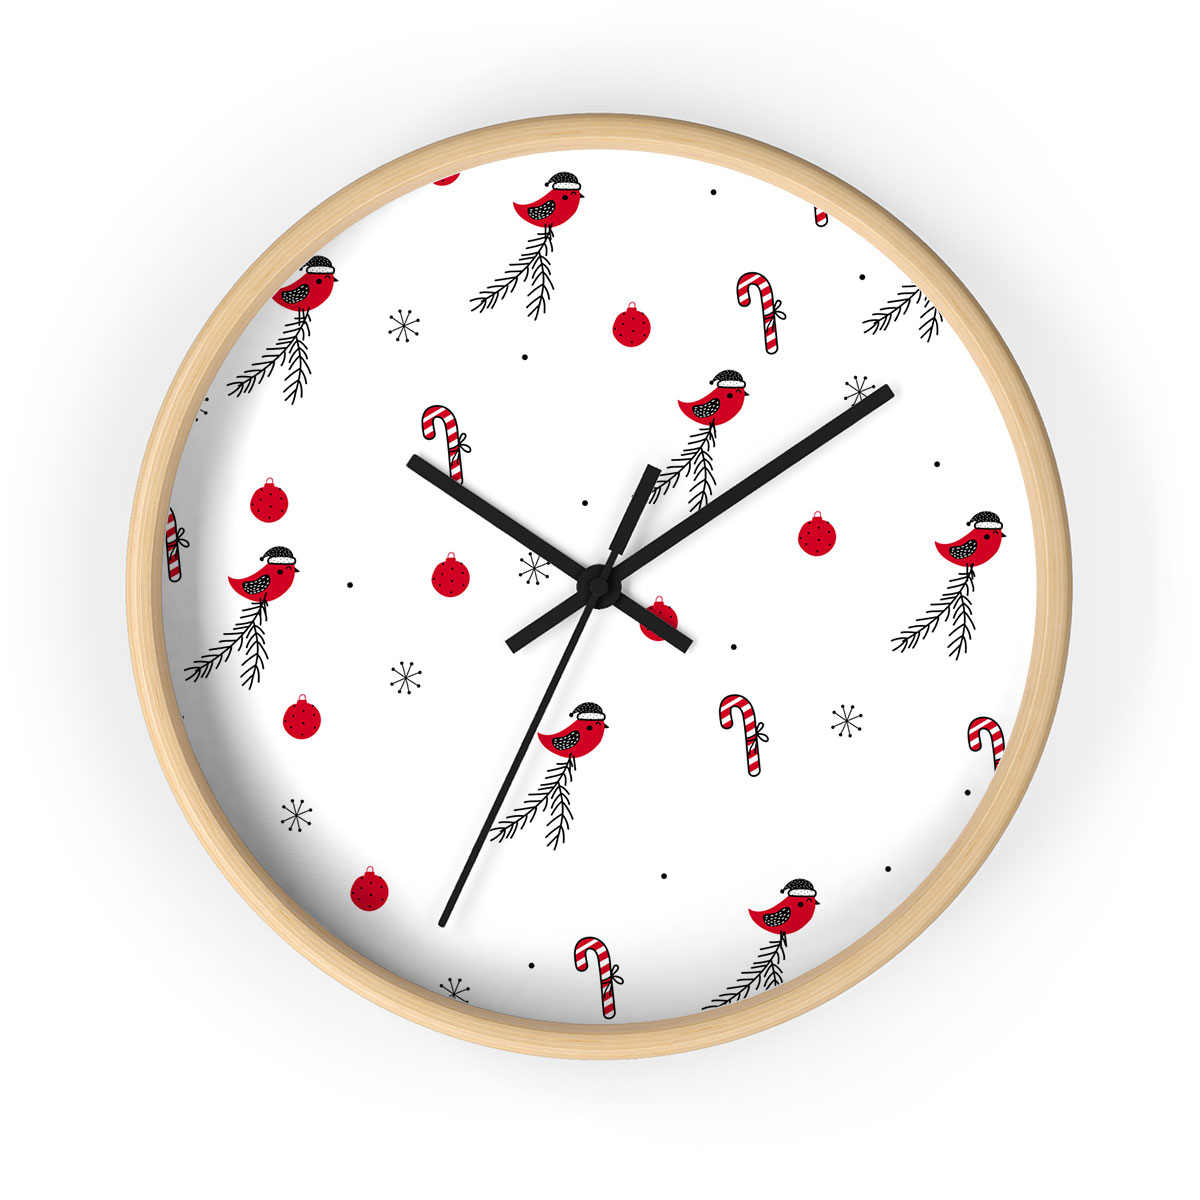 Cardinal Bird With Santa Hat, Candy Canes, Christmas Balls And Snowflake Clipart Seamless White Pattern Printed Wooden Wall Clock